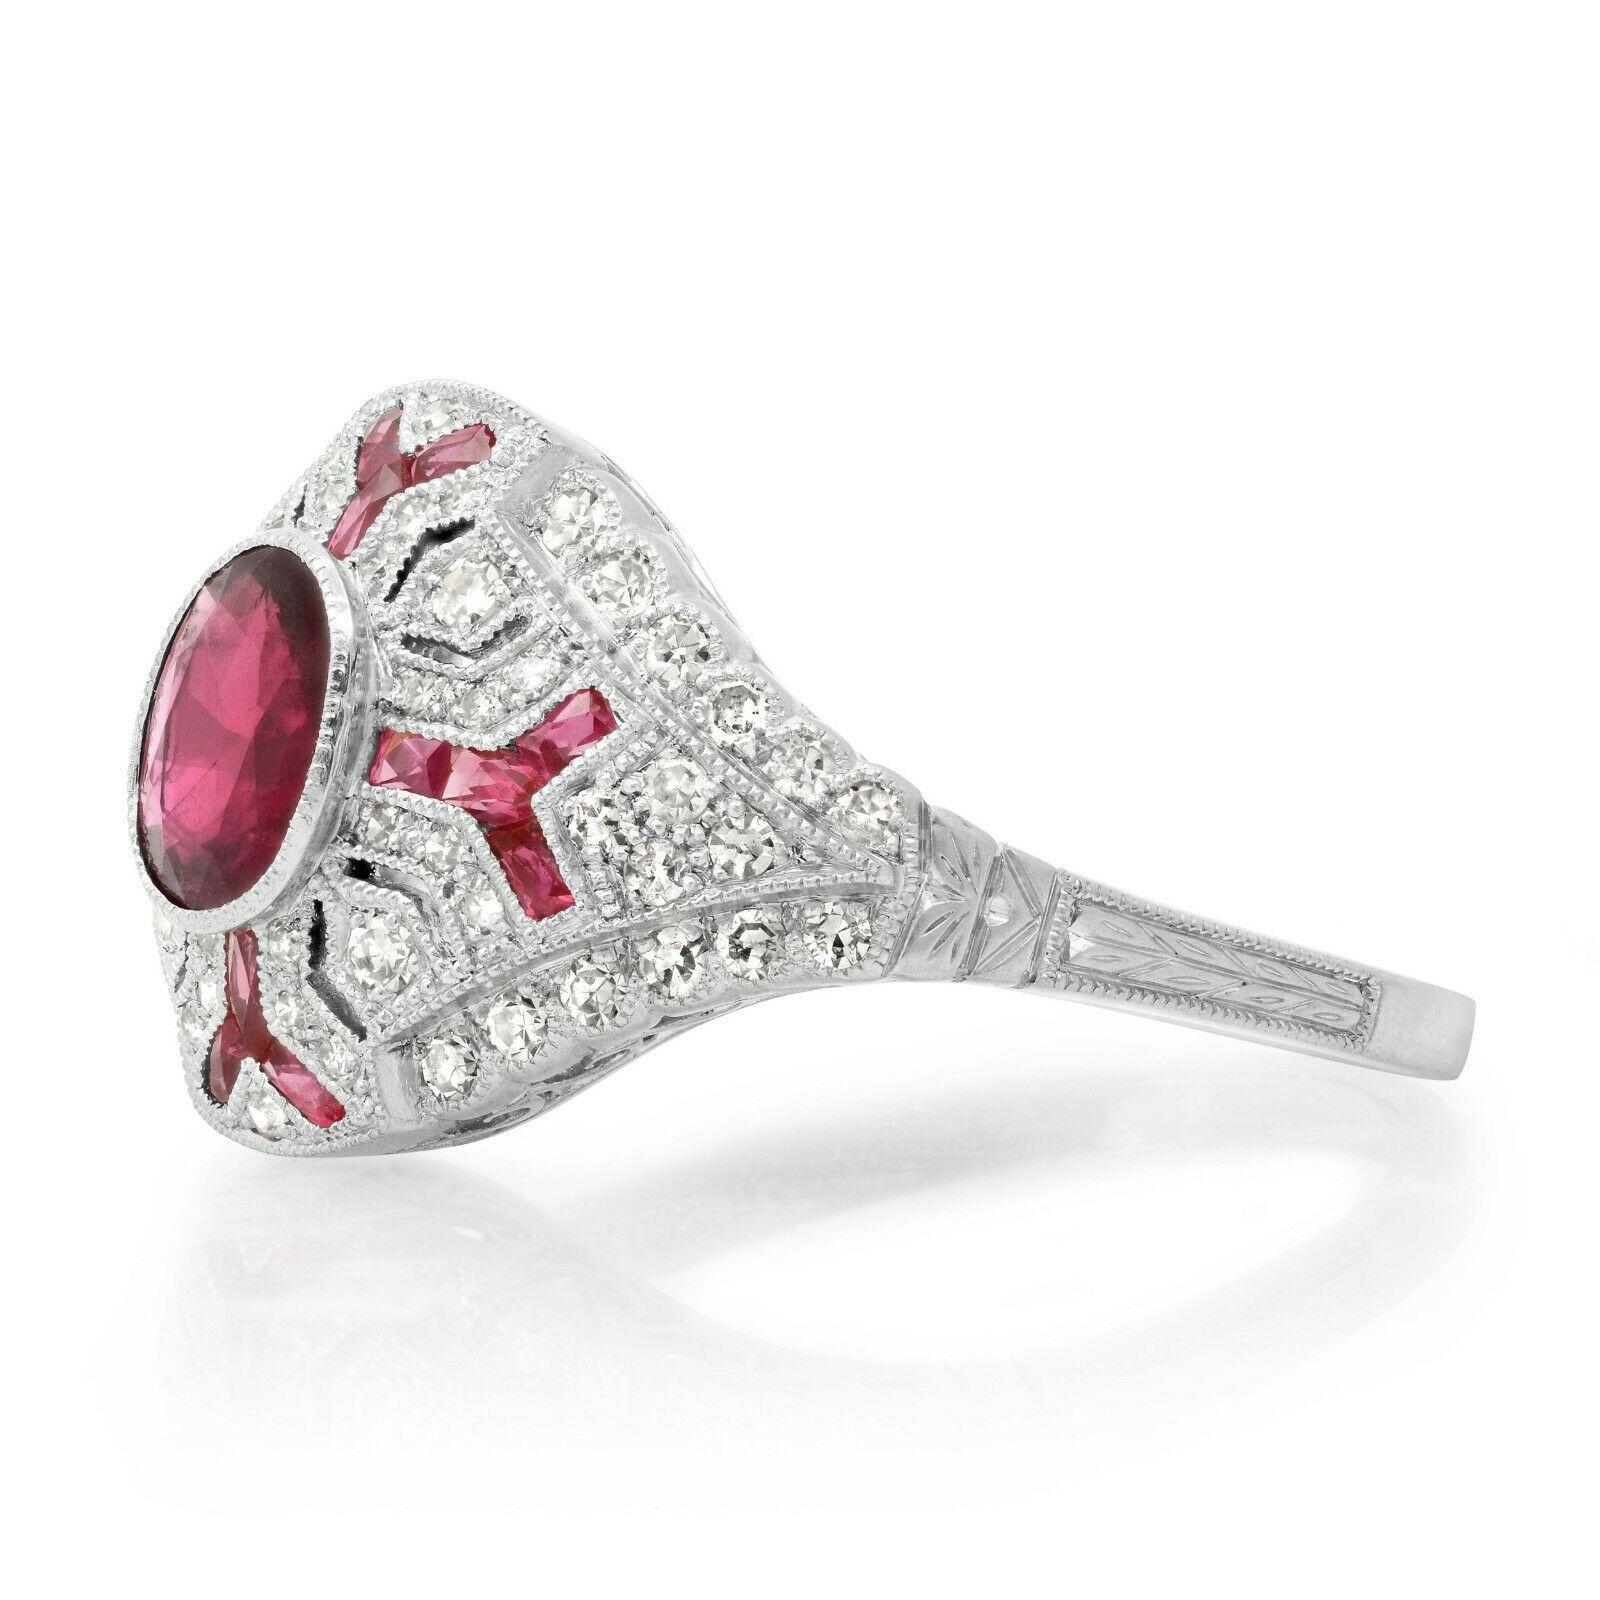 Ruby (1.16 total carat weight) and diamond (0.3 total carat weight) antique inspired cocktail ring in 900 platinum. The ring is designed and handmade locally in Los Angeles by Sage Designs L.A. using earth-mined and conflict free diamonds and